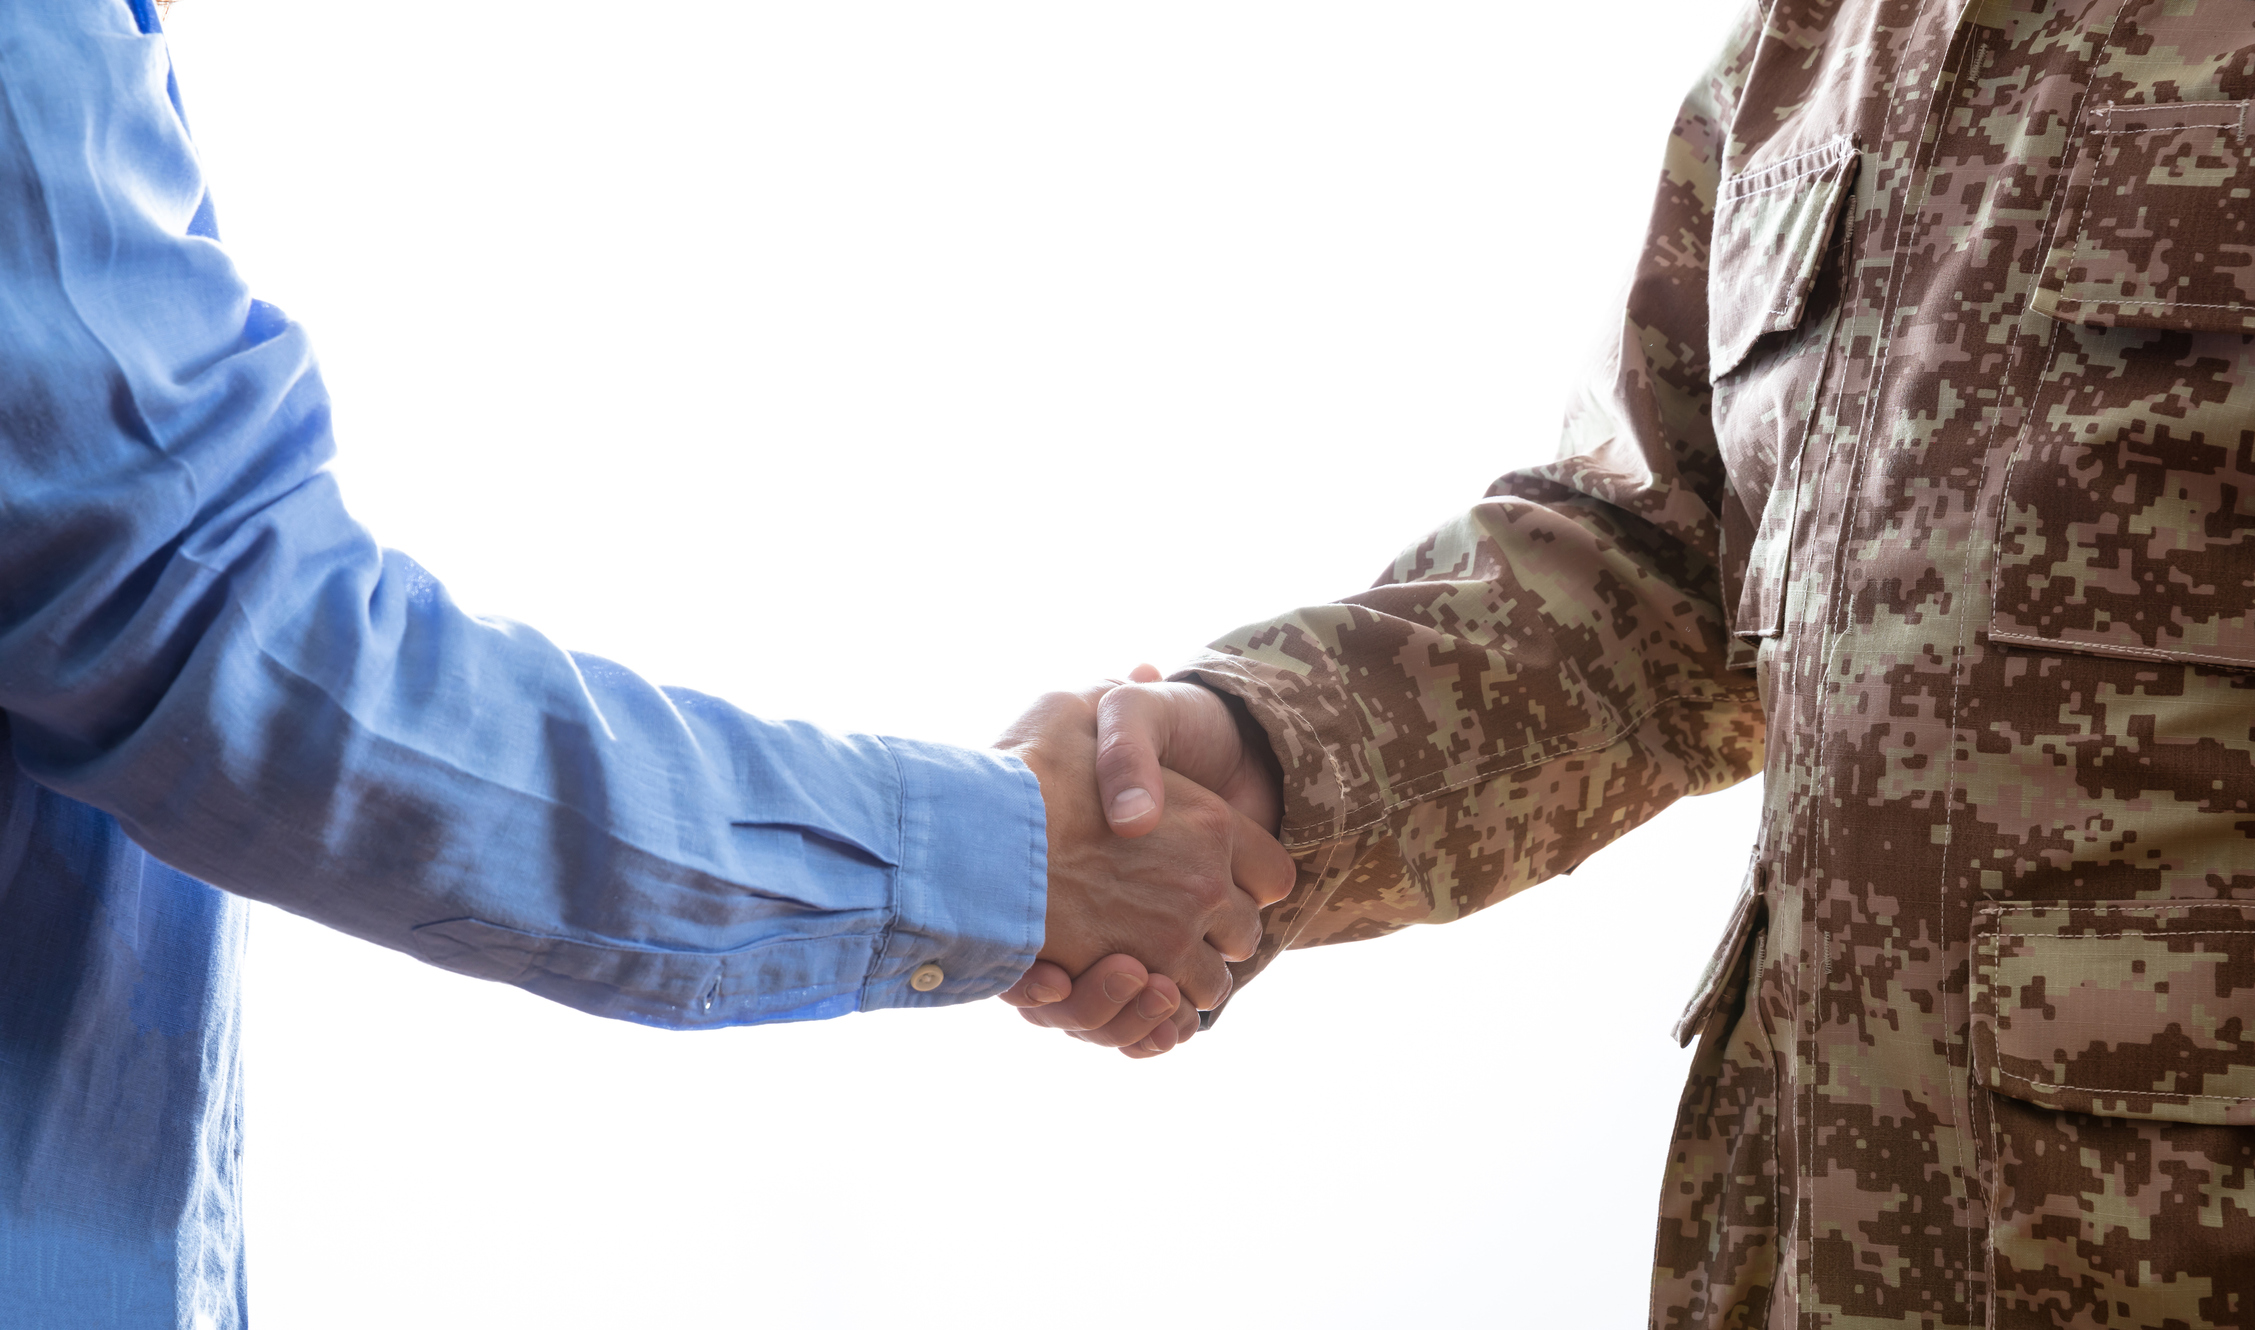 Military and civilian shaking hands standing on white background